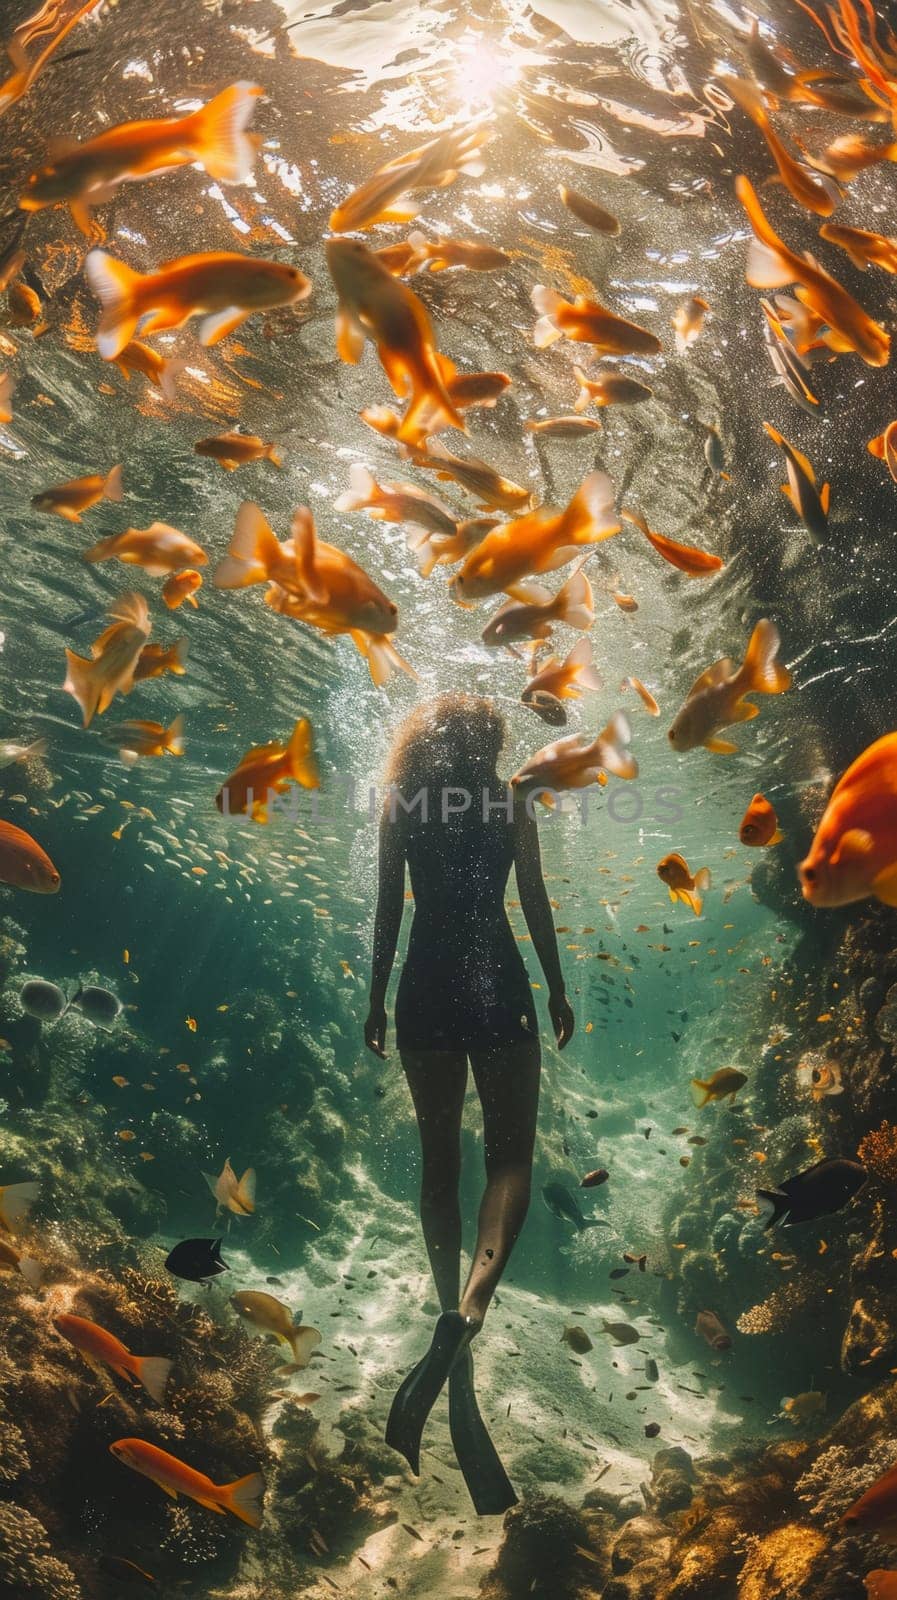 A woman in a wetsuit swimming through an ocean of fish